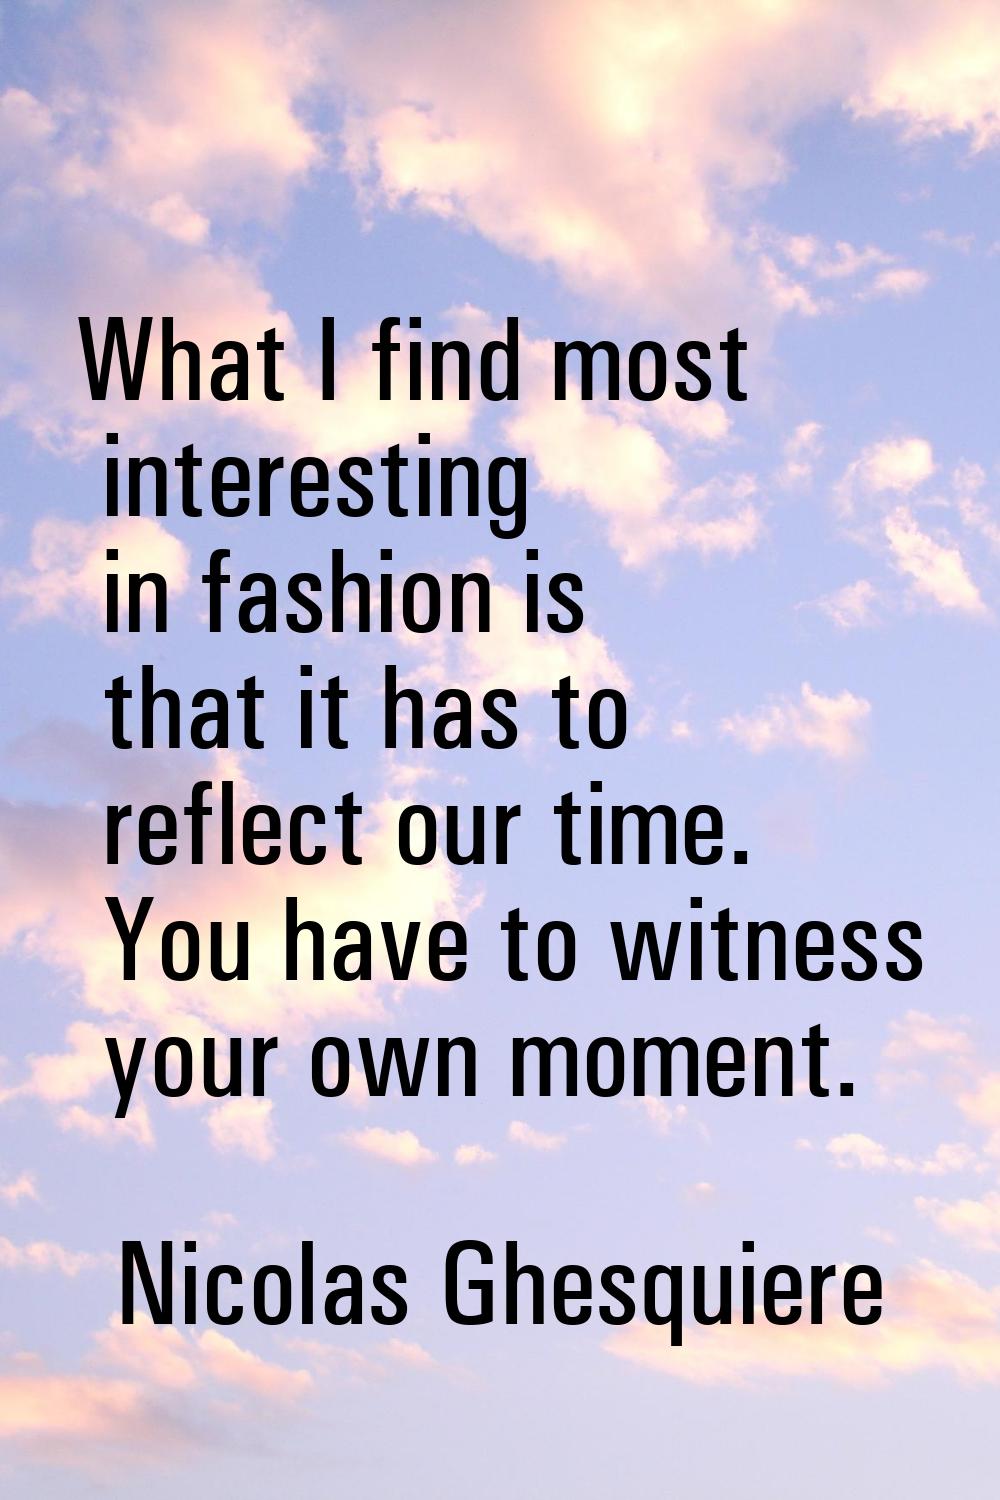 What I find most interesting in fashion is that it has to reflect our time. You have to witness you